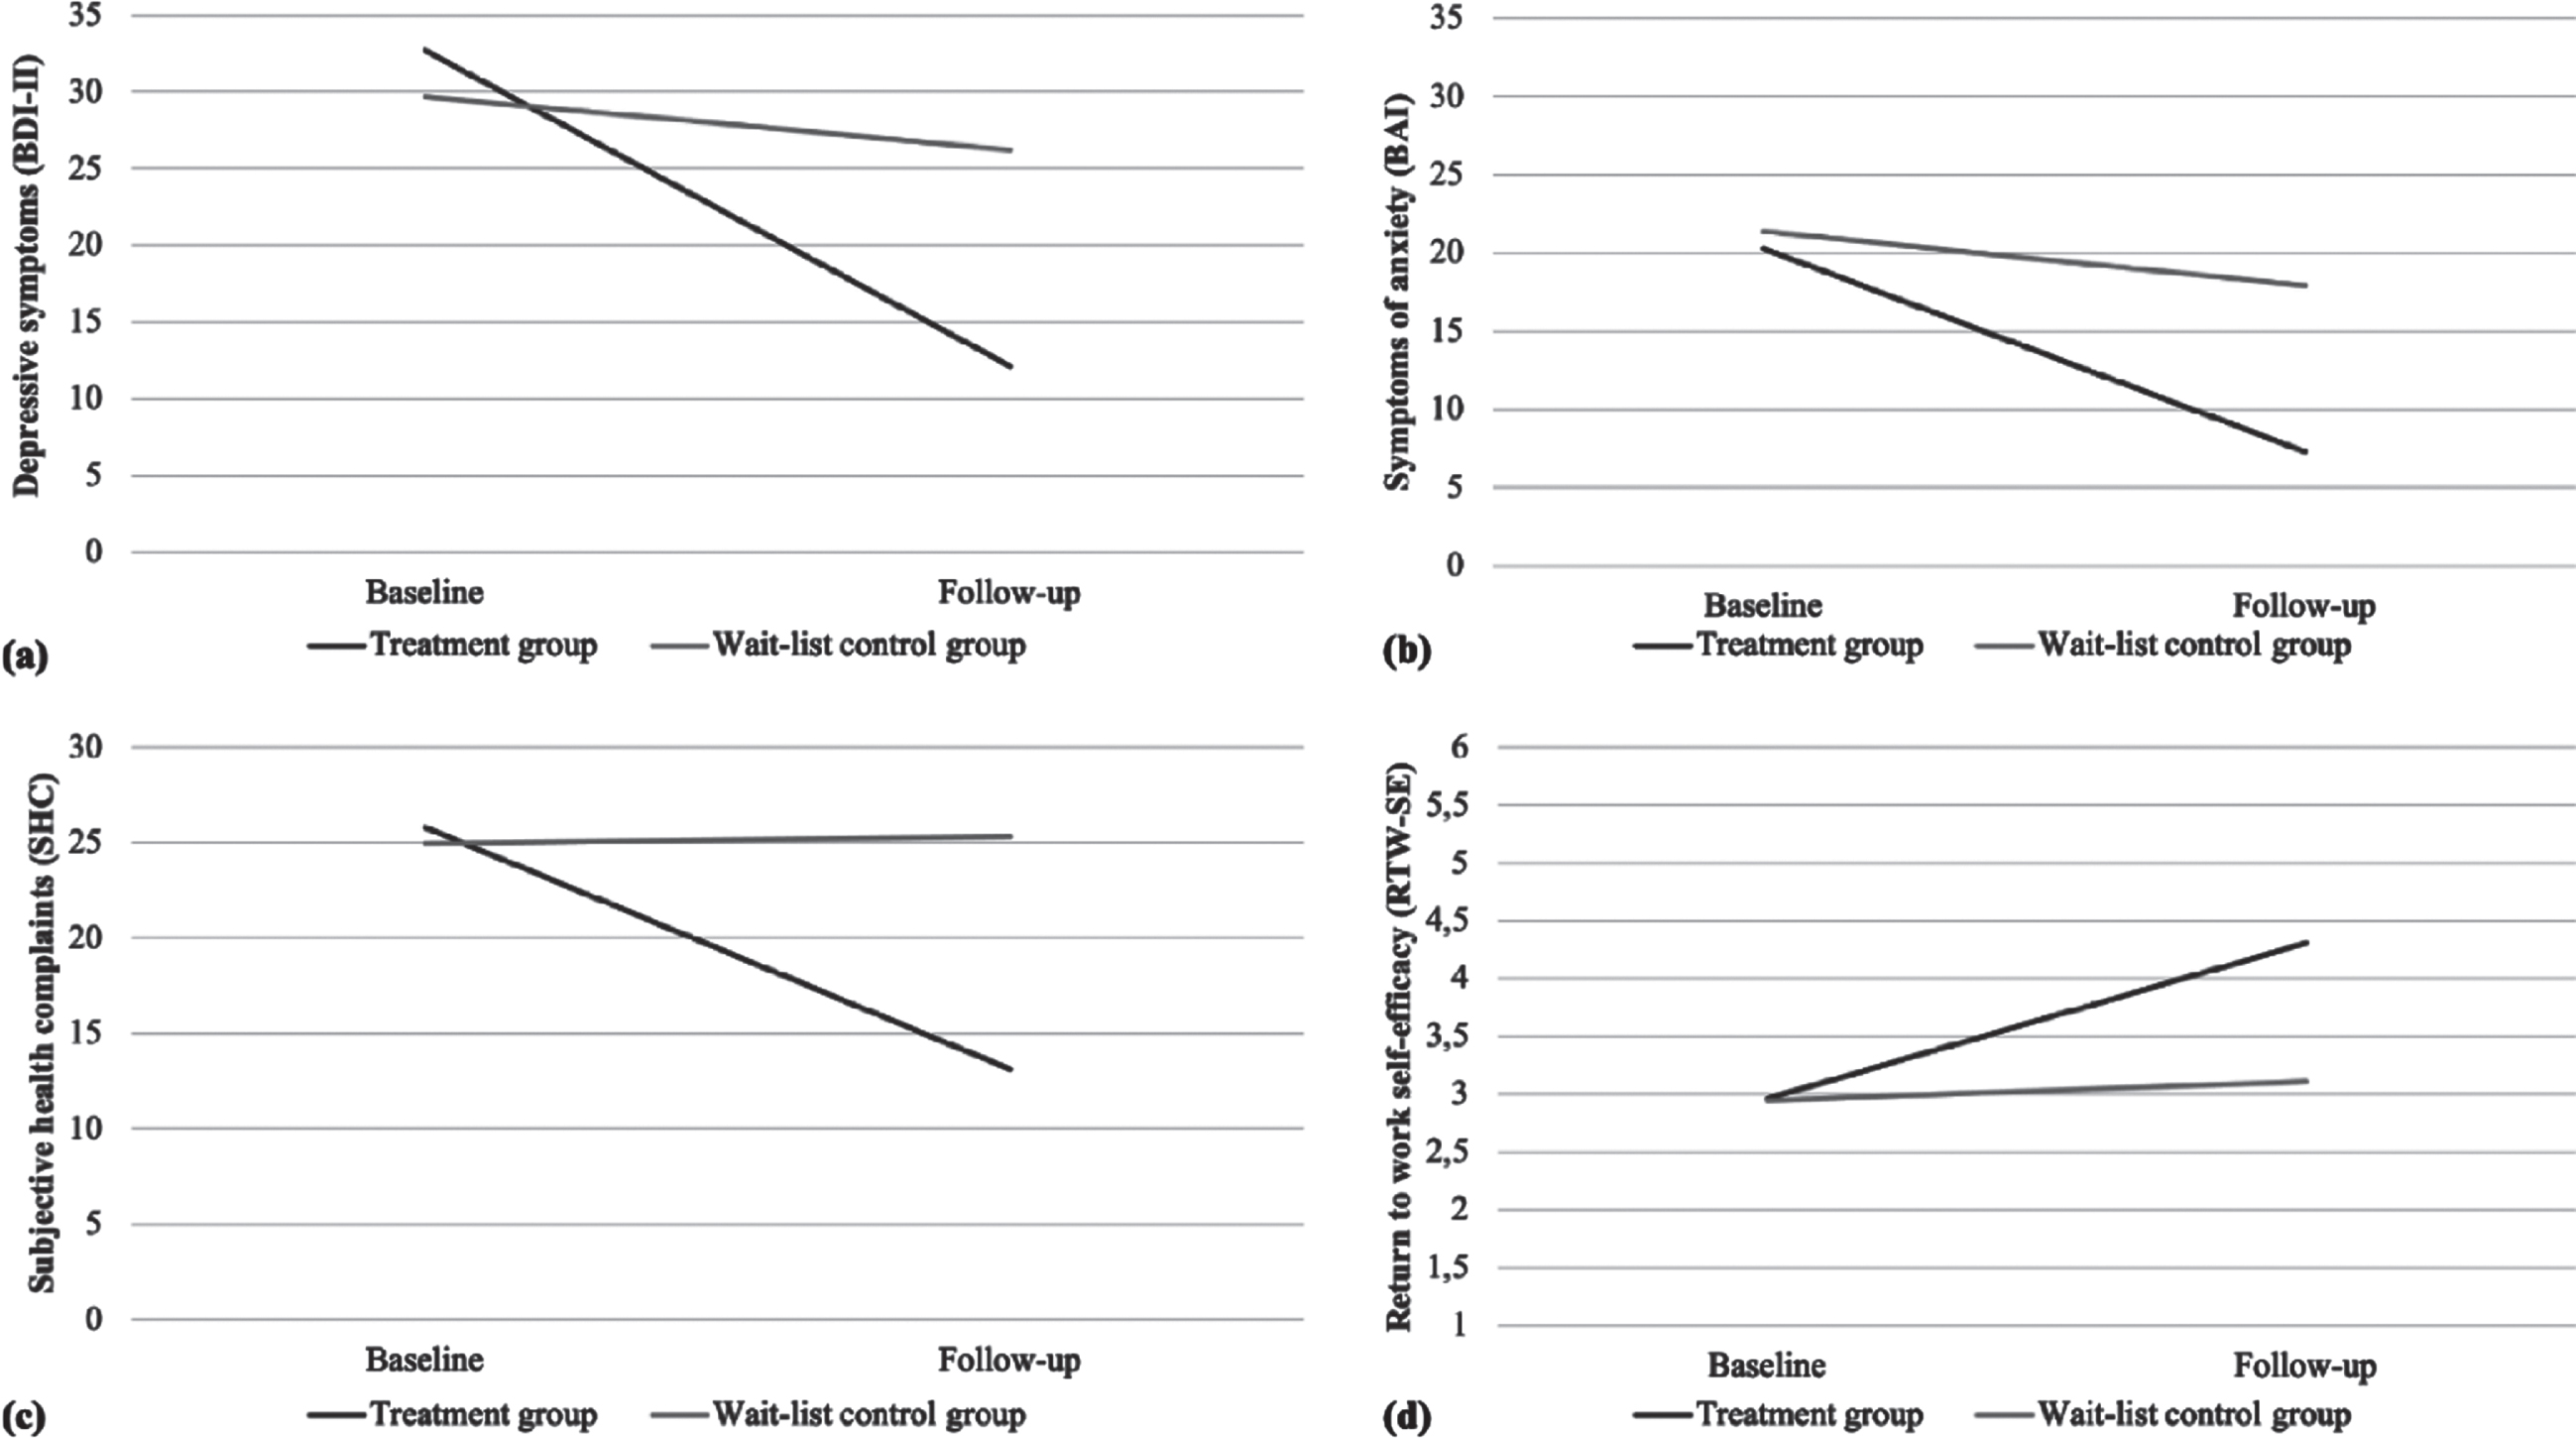 Differences in depressive symptoms (a), symptoms of anxiety (b), subjective health complaints (c), and return to work self-efficacy (d) from baseline to follow-up for the victims of bullying; treatment group compared to the wait-list control group.